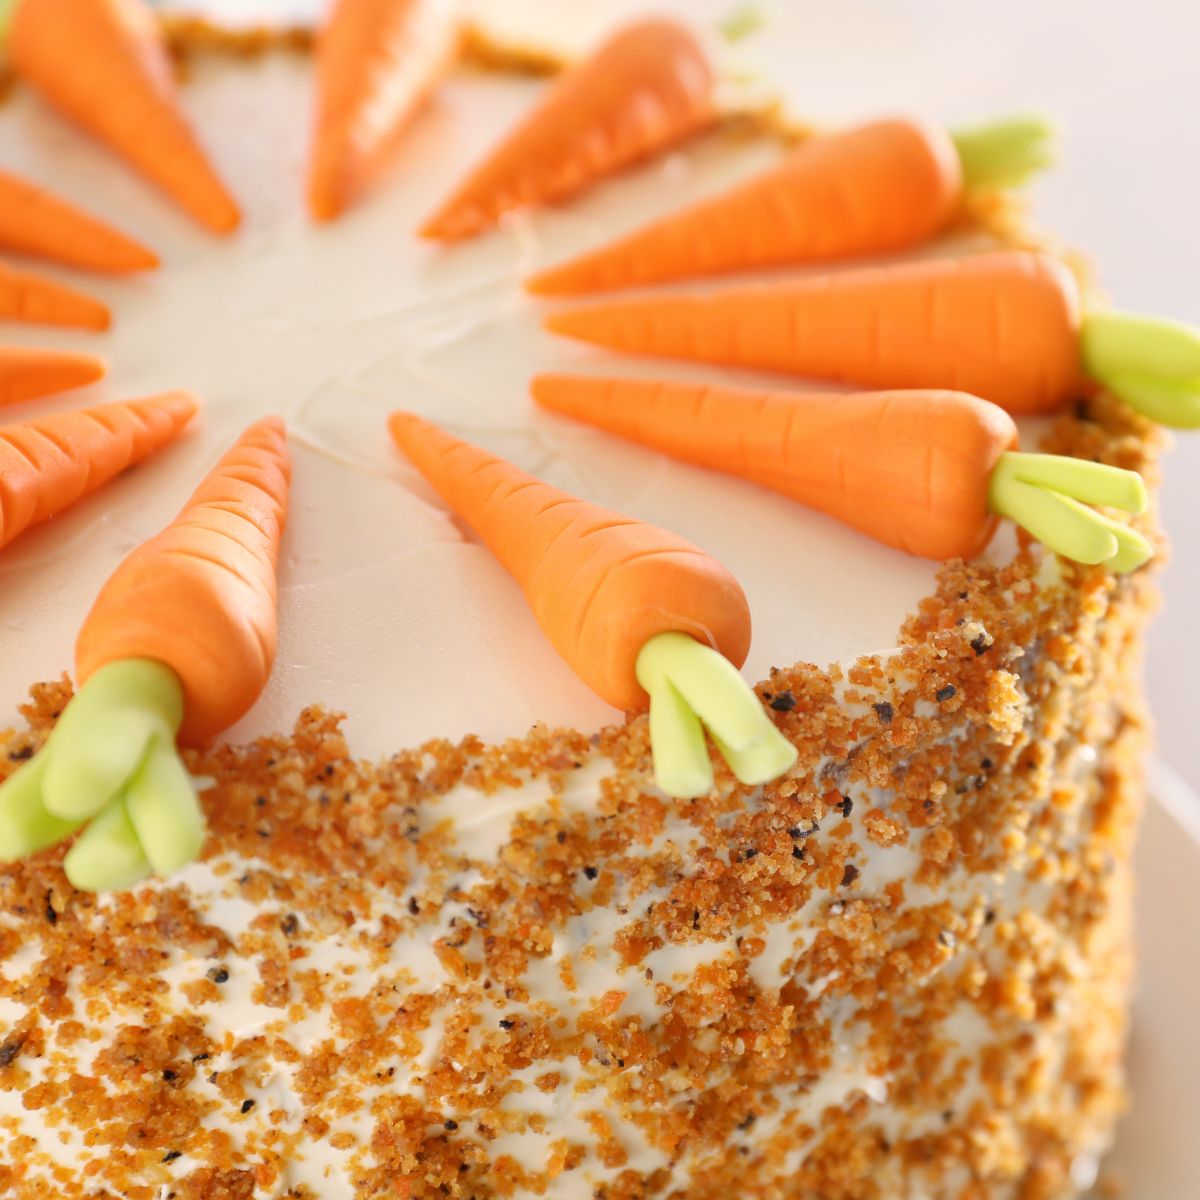 This a closeup of carrot cake on a plate.